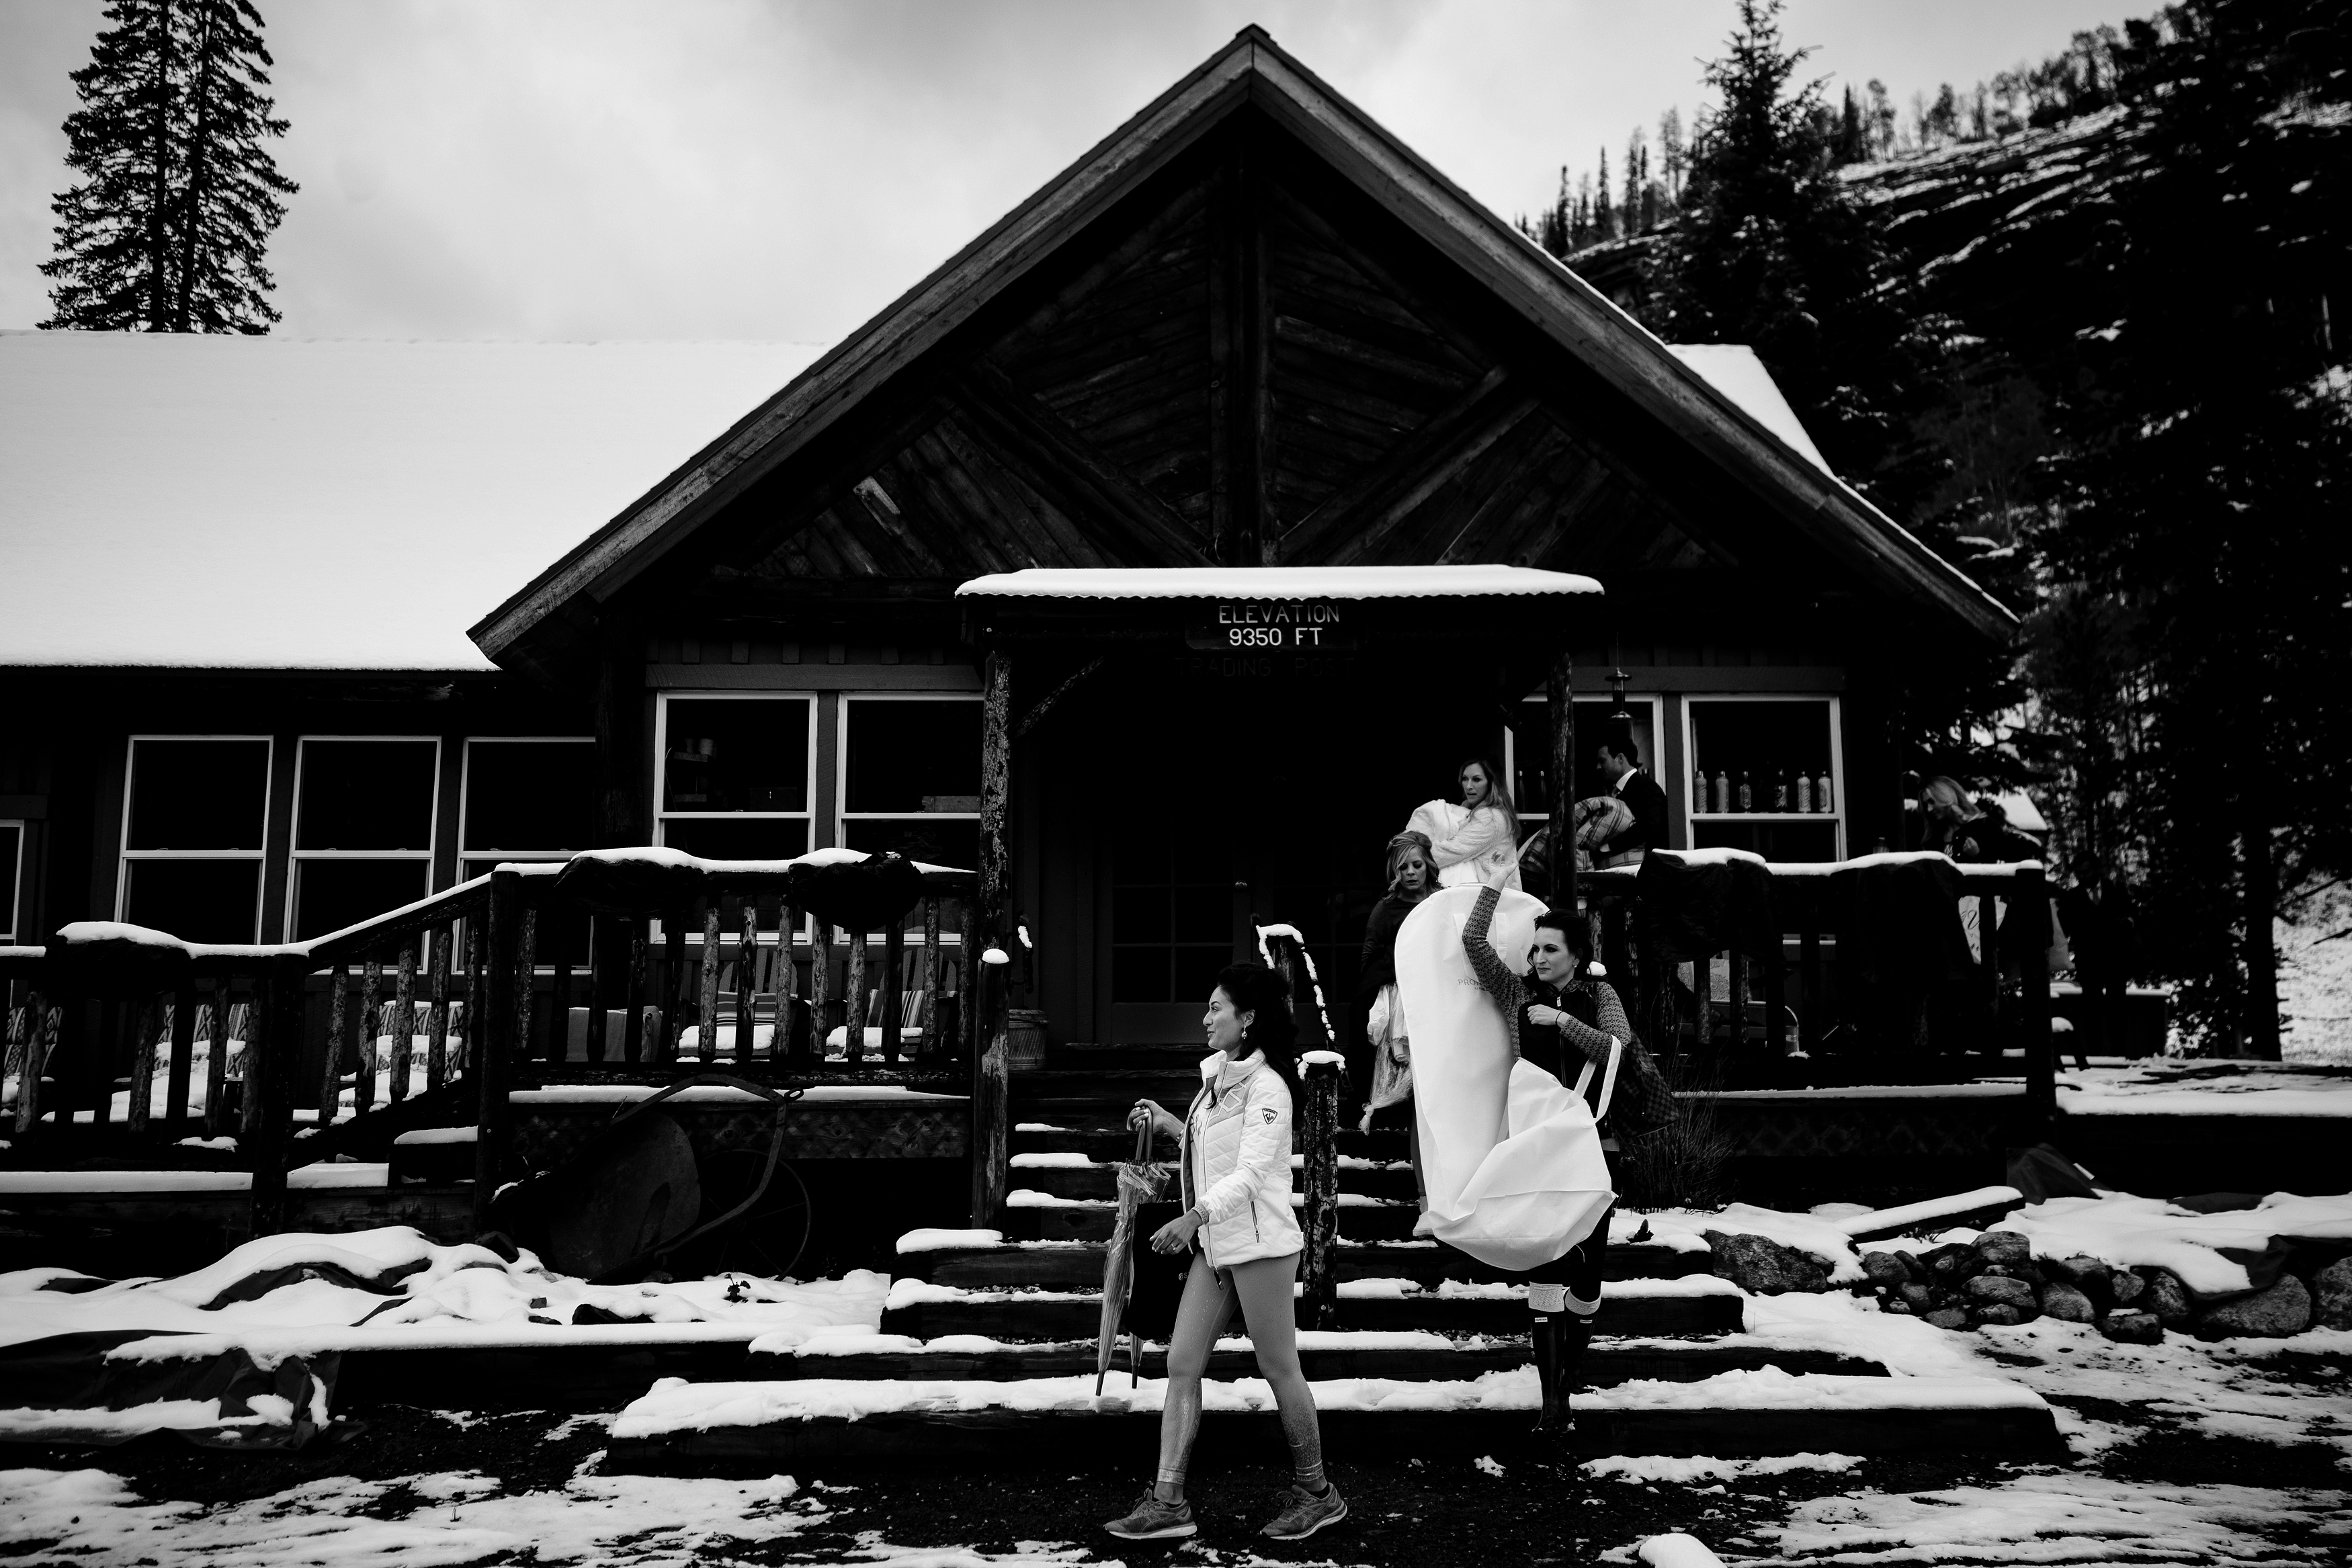 The bride & her bridesmaids arrive at Piney River Ranch to an unexpected snowstorm in June.